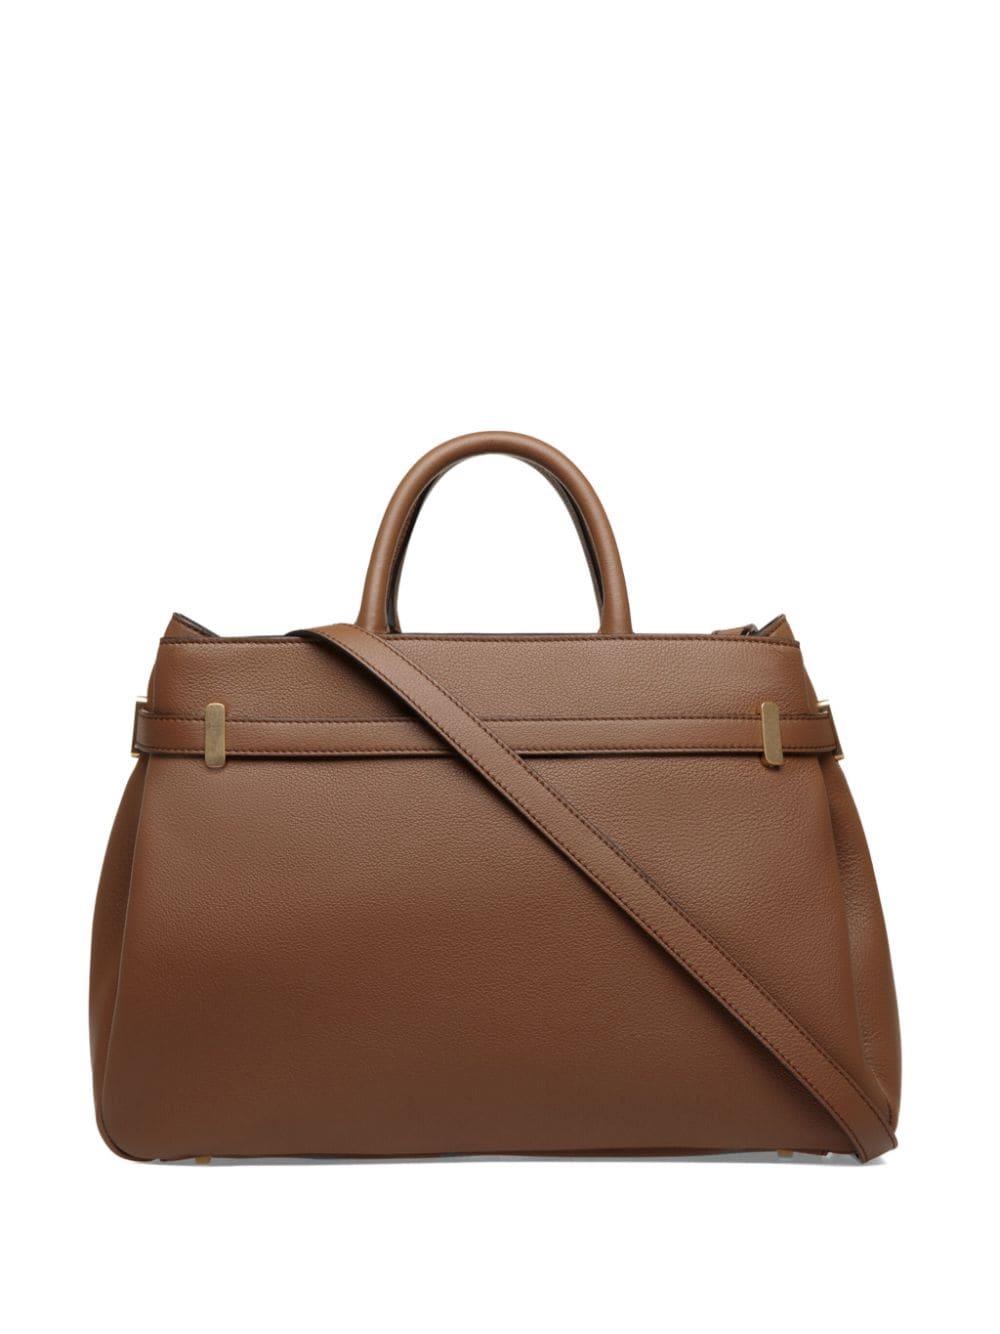 Bally Carriage Lock leather tote bag - Brown